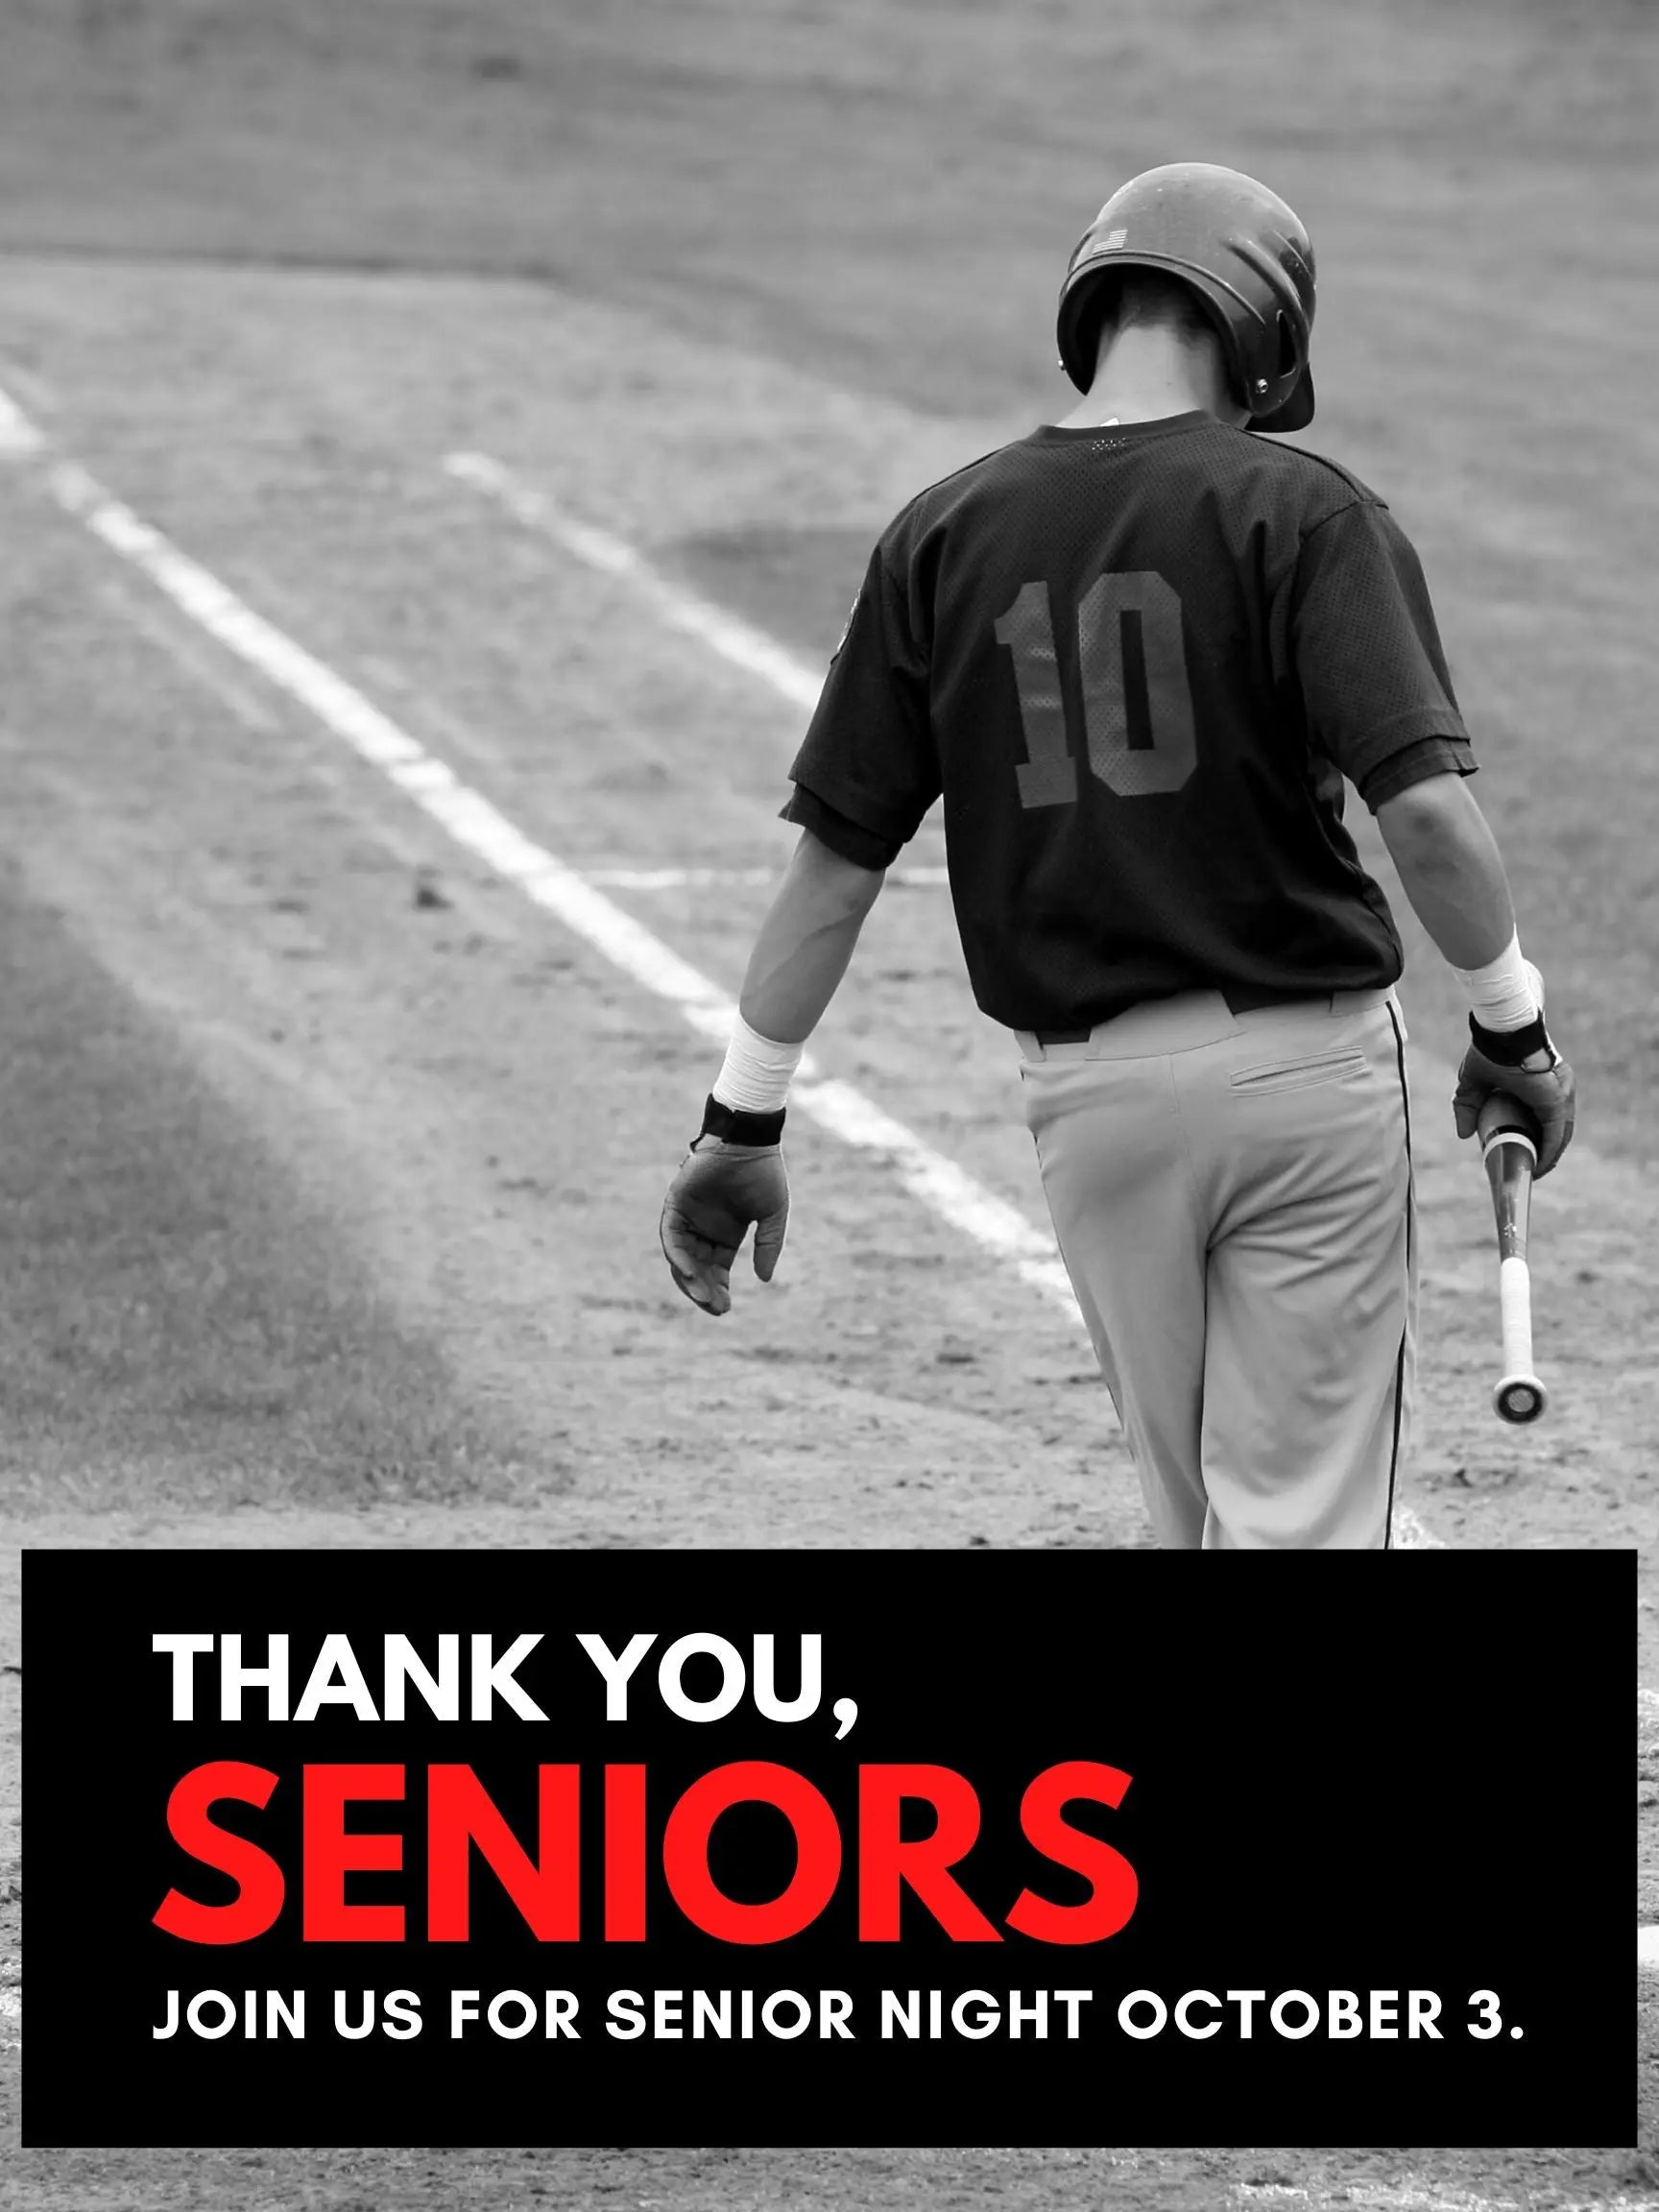 Baseball Senior Night Poster to Promote Your Baseball Senior Night